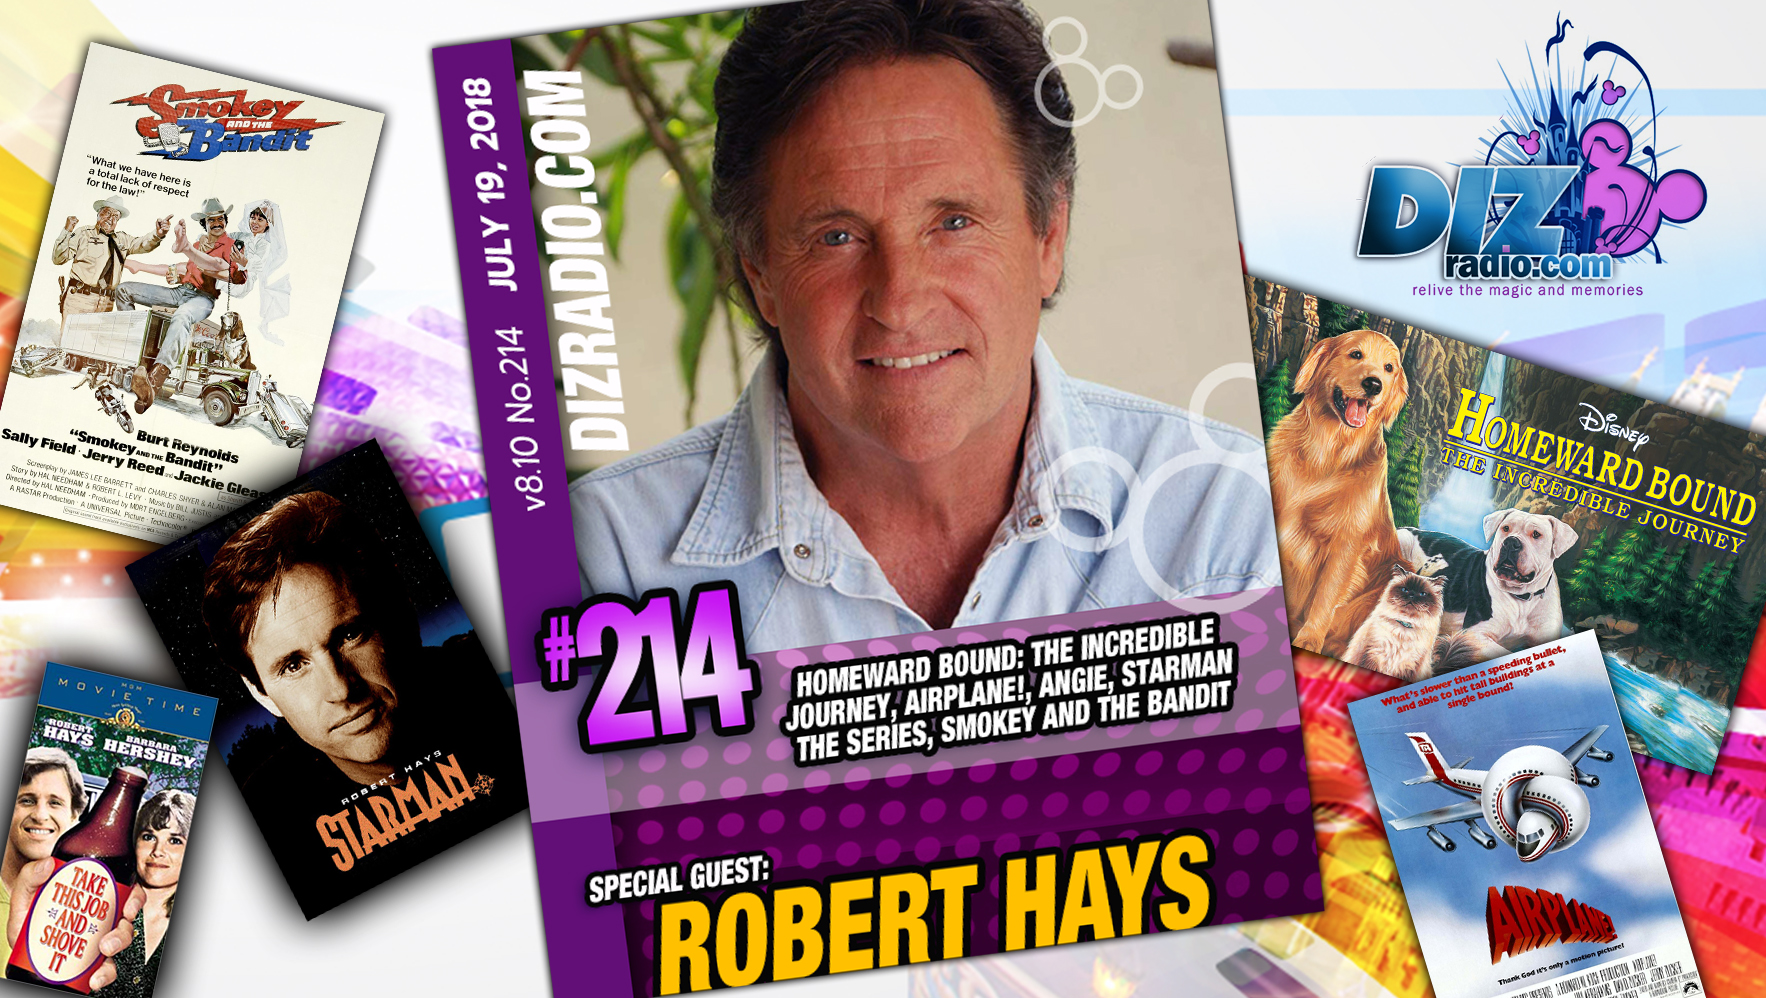 DisneyBlu's DizRadio Disney on Demand Show #214 w/ Special Guest ROBERT HAYS (Homeward Bound, Airplane!, Starman the Series, Angie, Smokey and the Bandit and more)